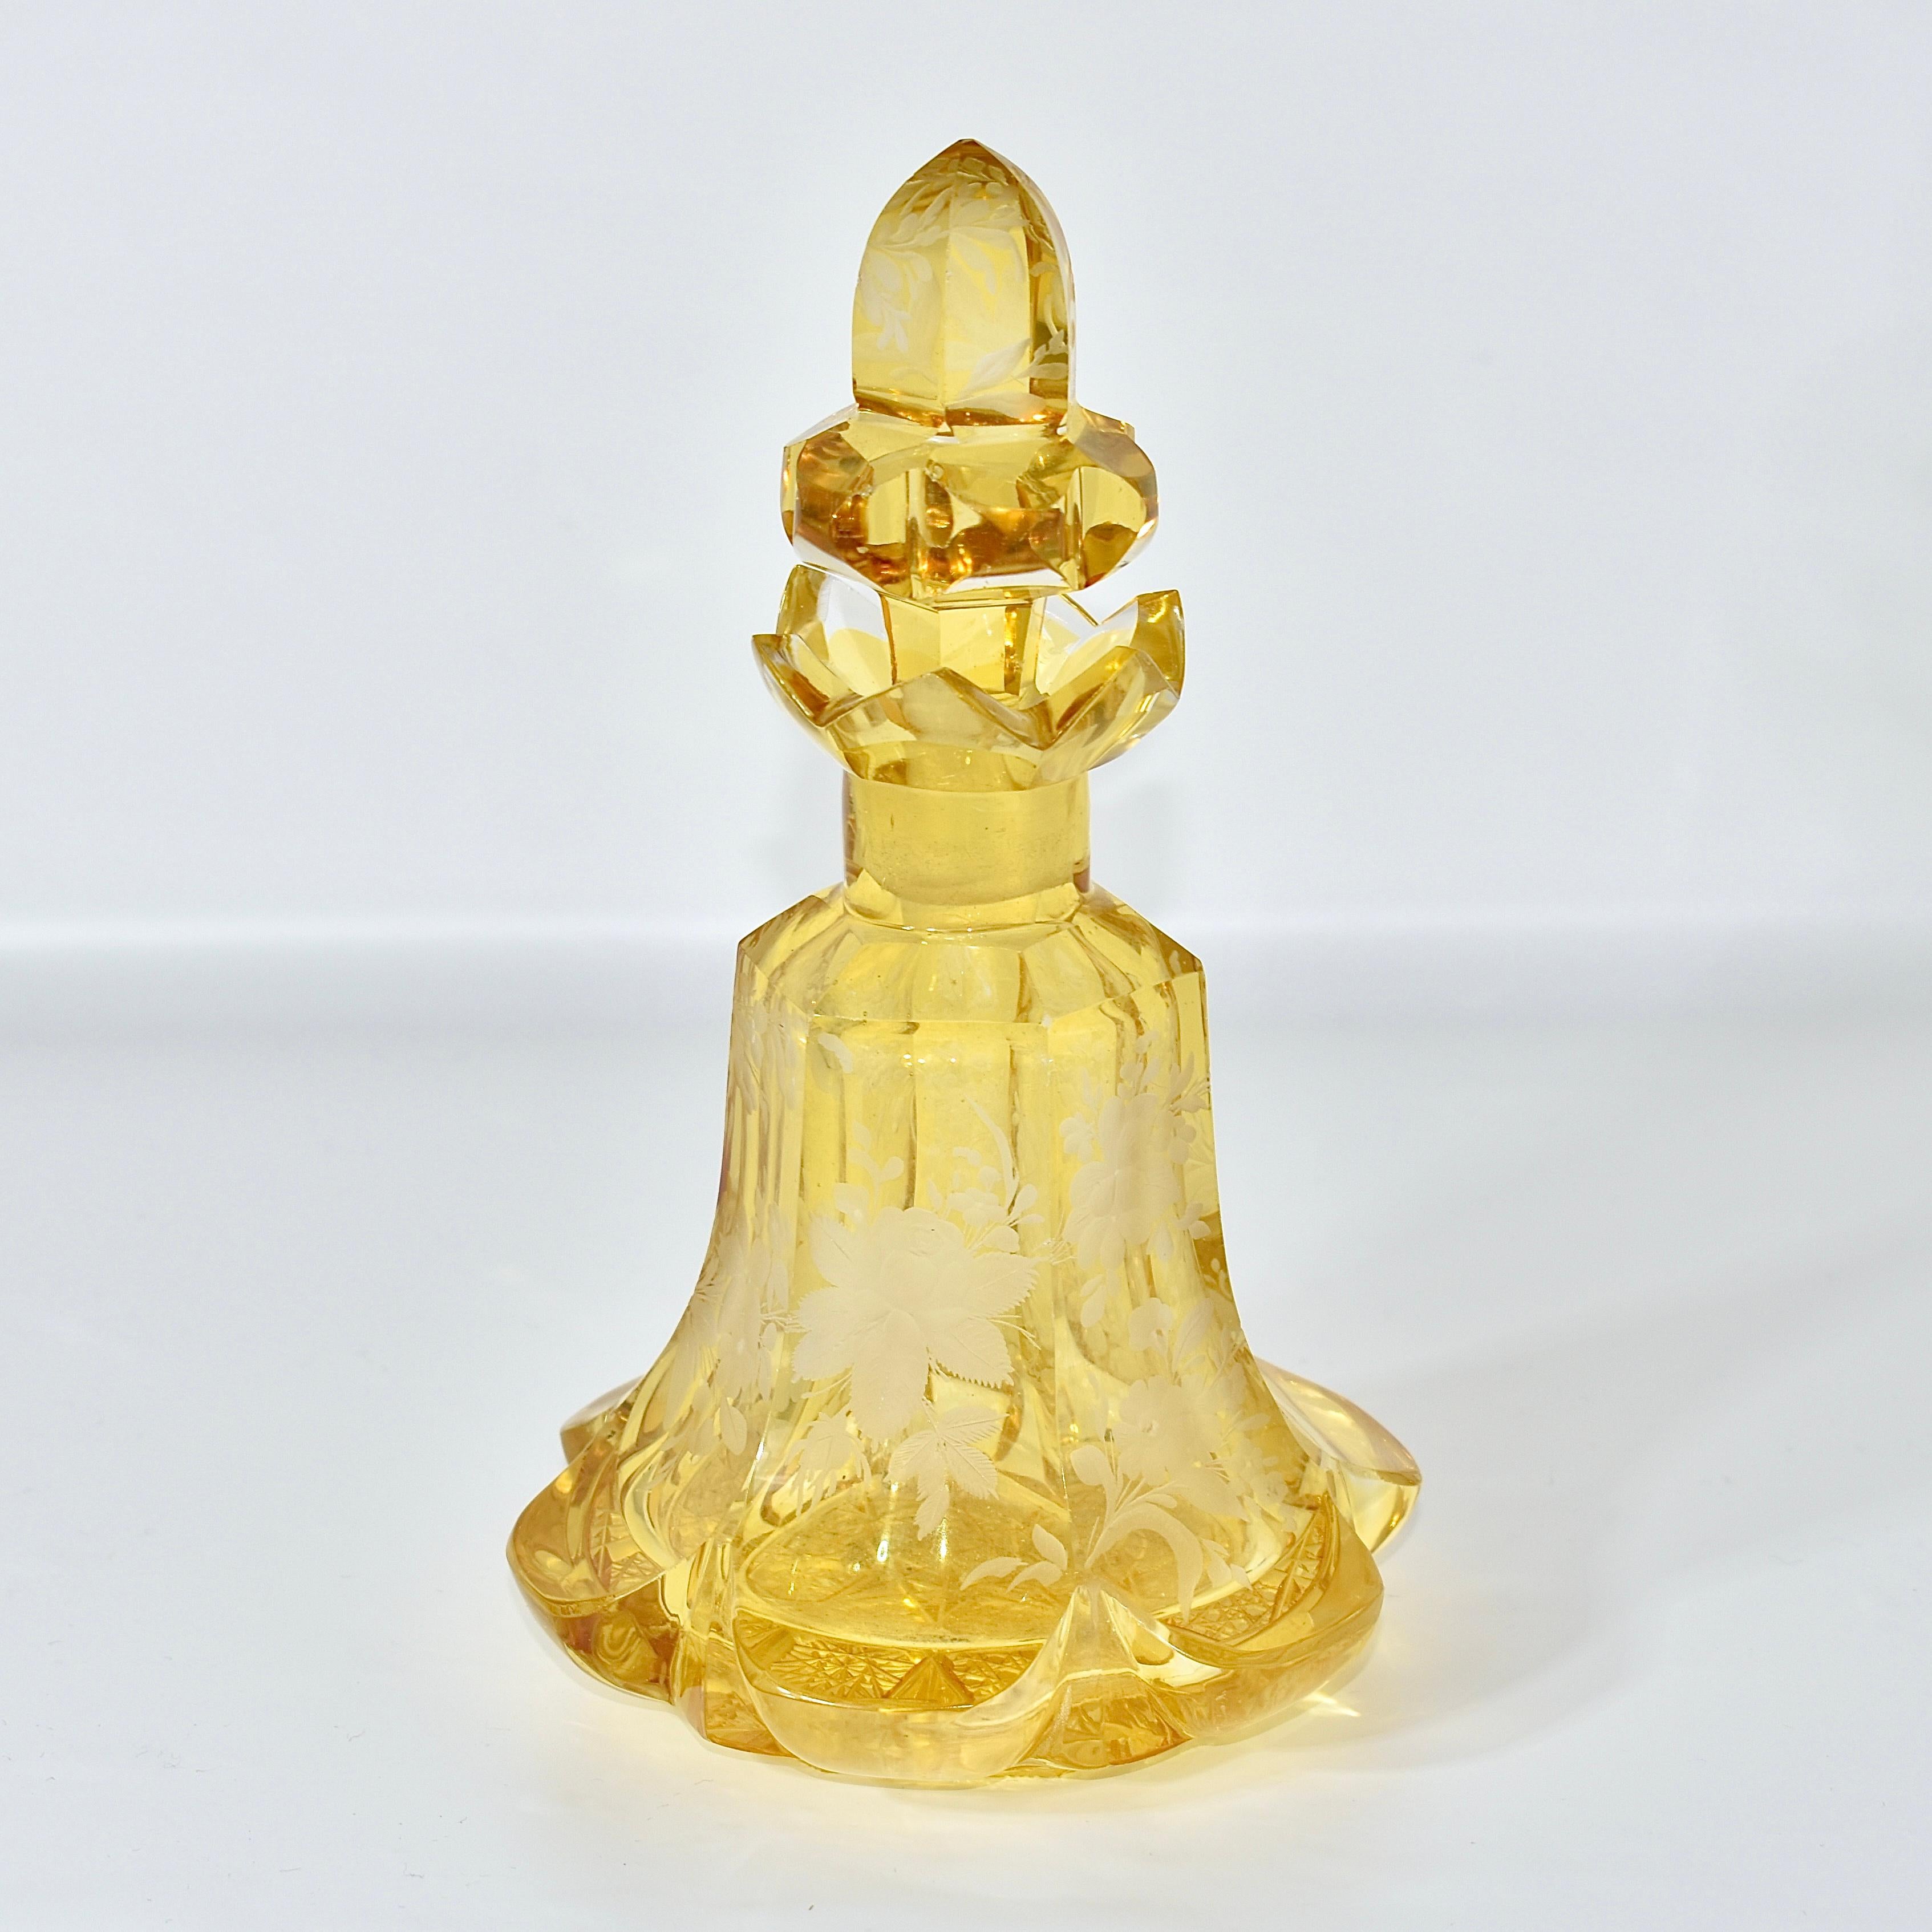 Antique scent bottle, with stopper, very rare Amber colored crystal glass

finely engraved all around with natural scene of leaves and flowers

the brilliantly cut base at the bottom shows the Quality and Authenticity of this Masterpiece


Bohemia,